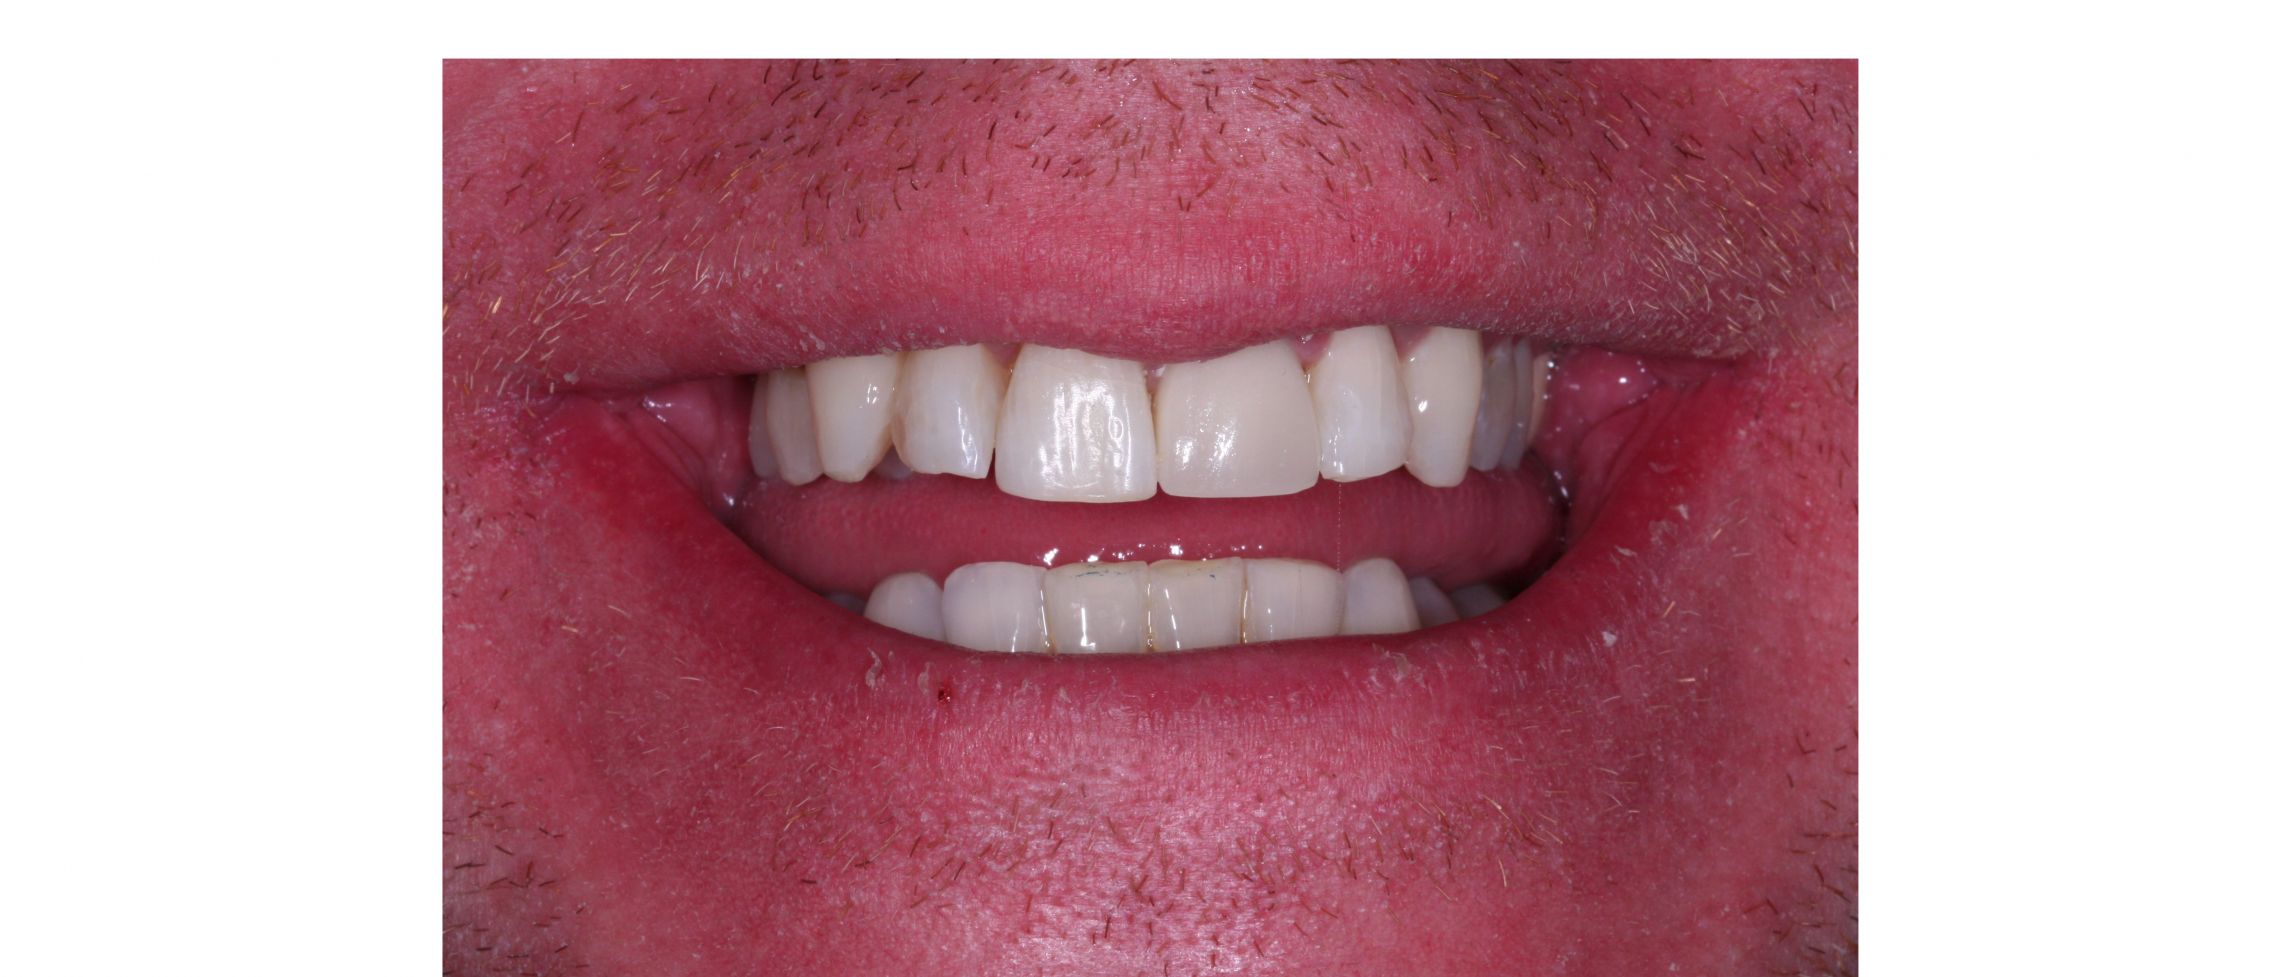 case4 - after treatment